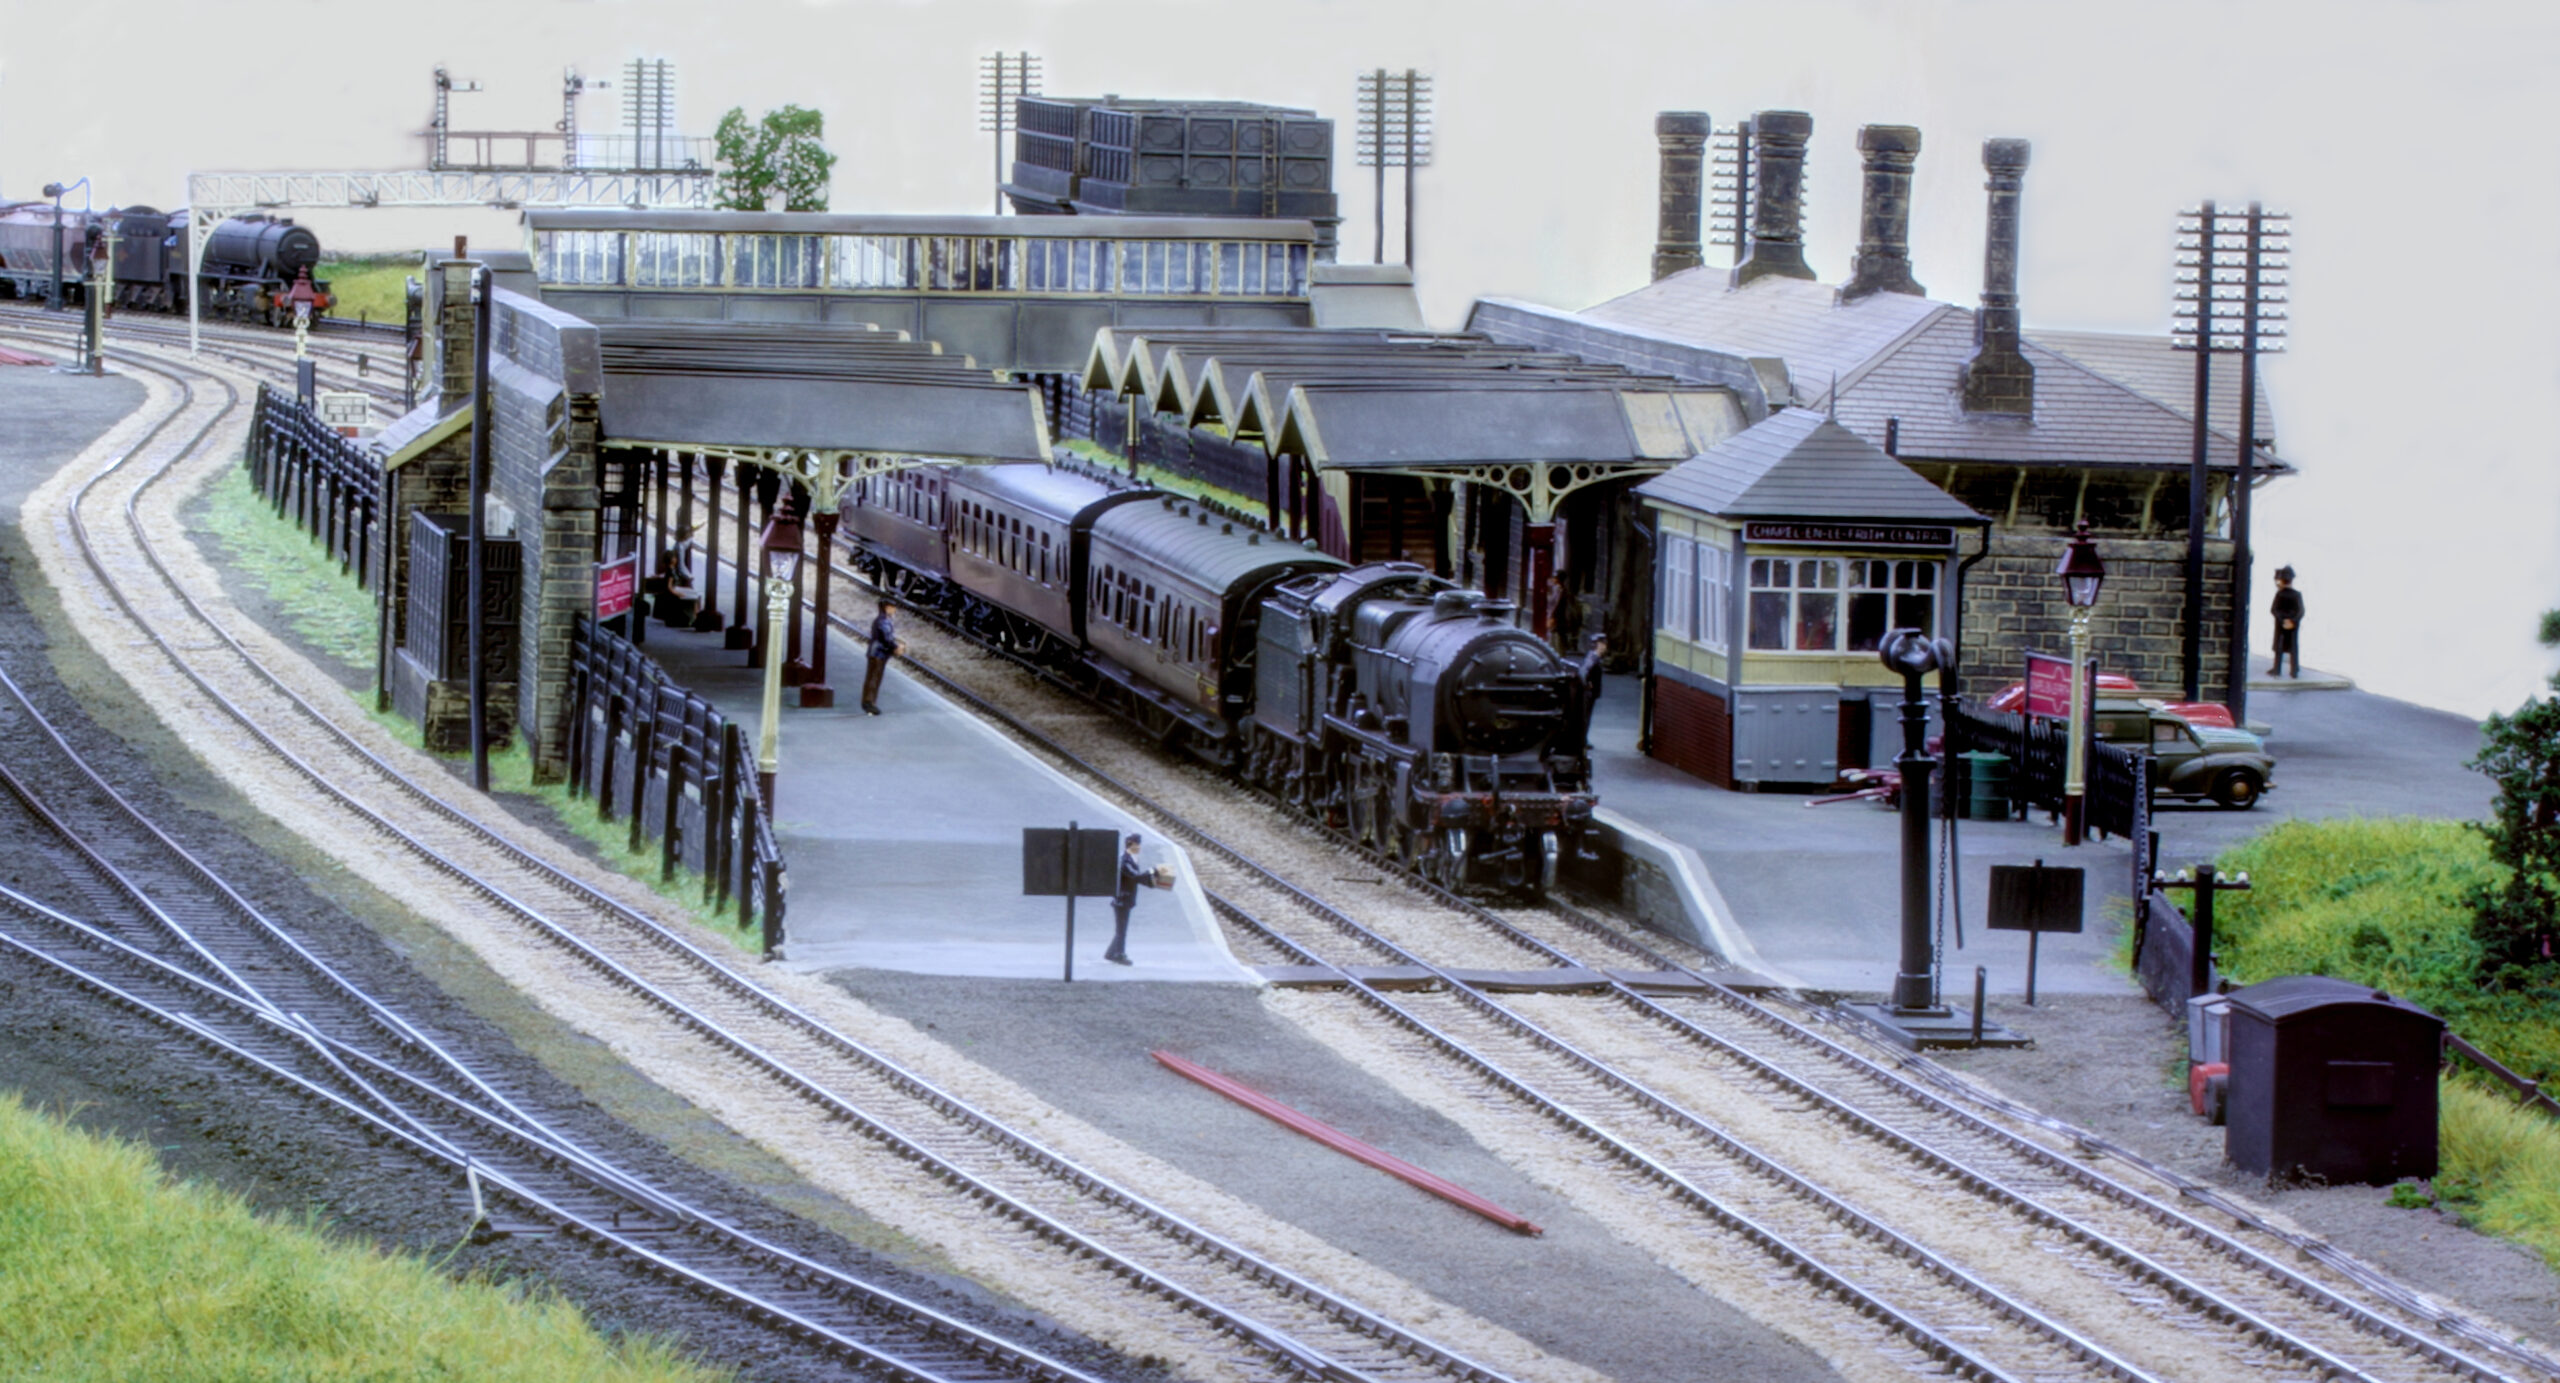 Leeds Model Railway Society’s 72nd Annual Exhibition